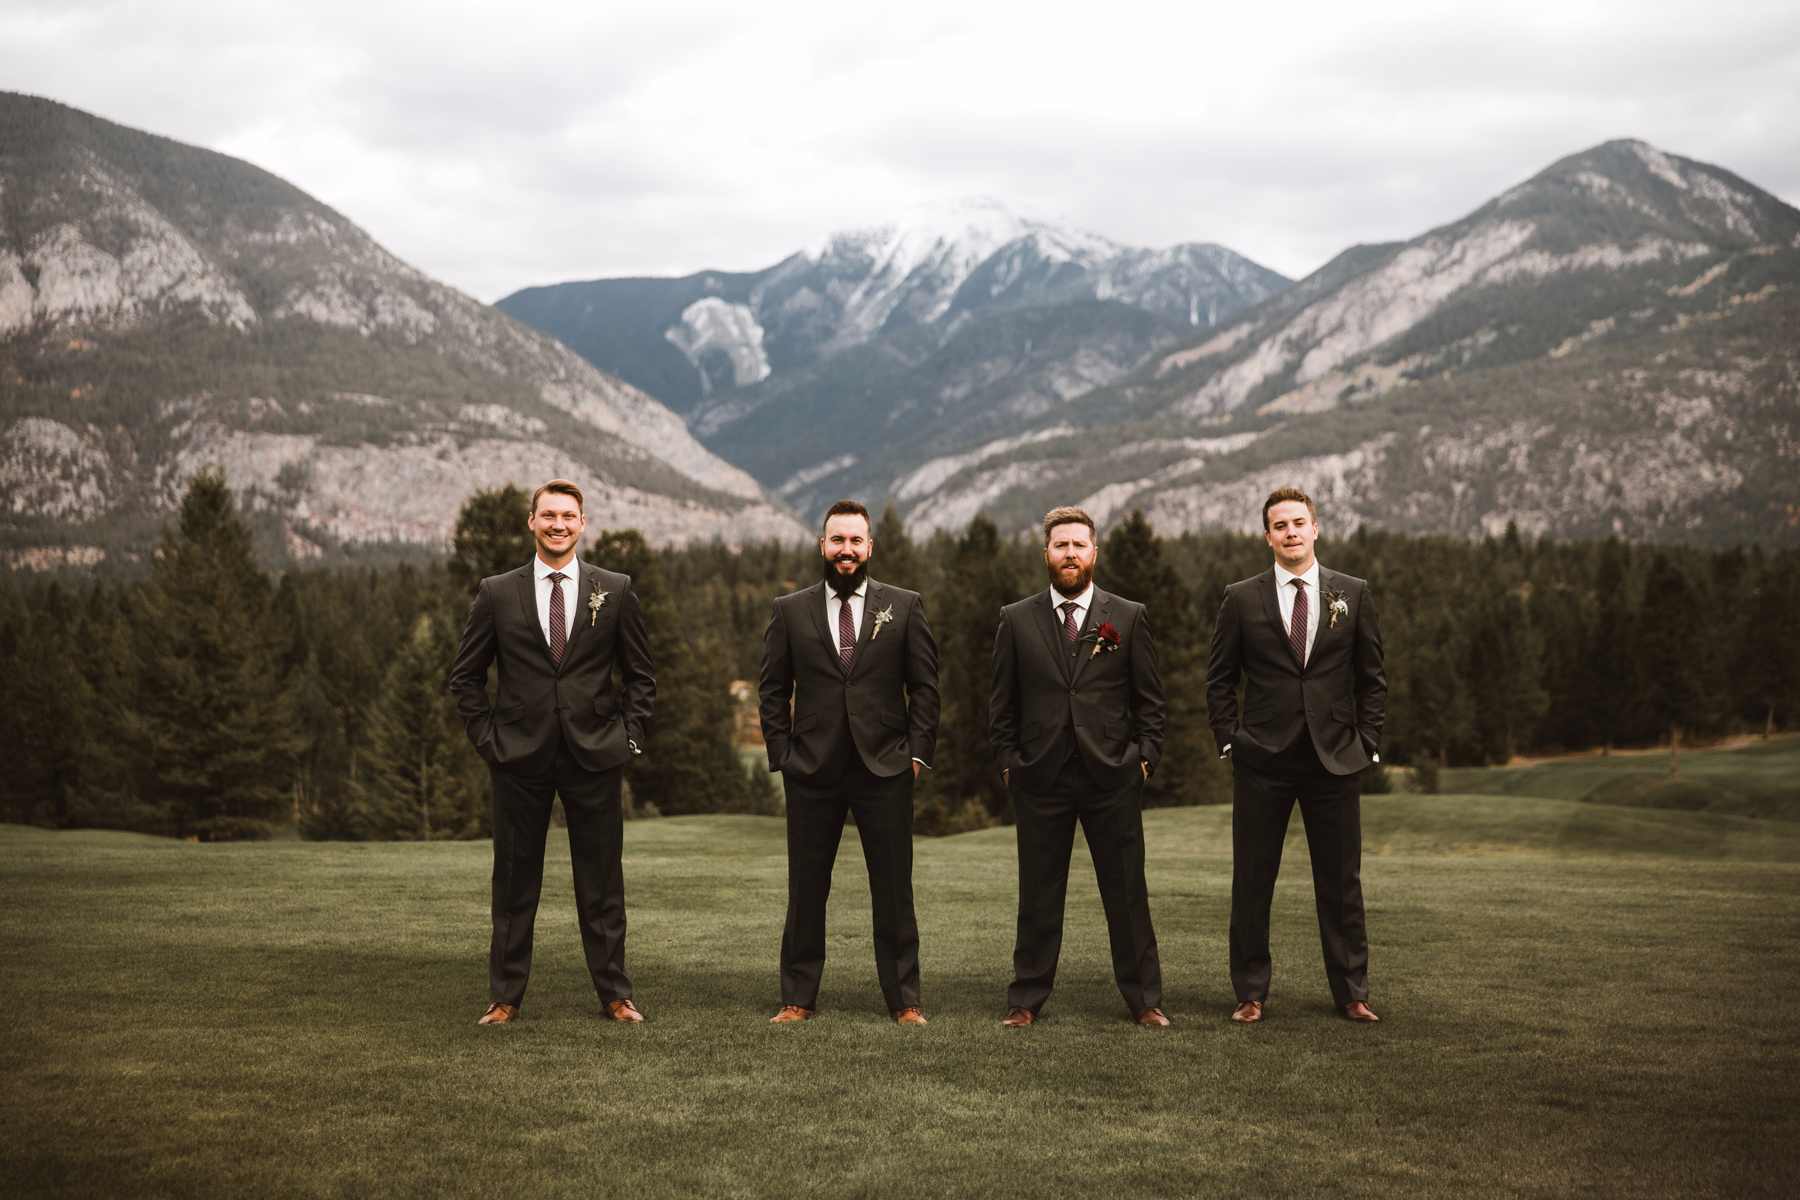 Calgary wedding photographer in Invermere for adventurous mountain destination elopement at Eagle Ranch Golf Resort, British Columbia - Image 29